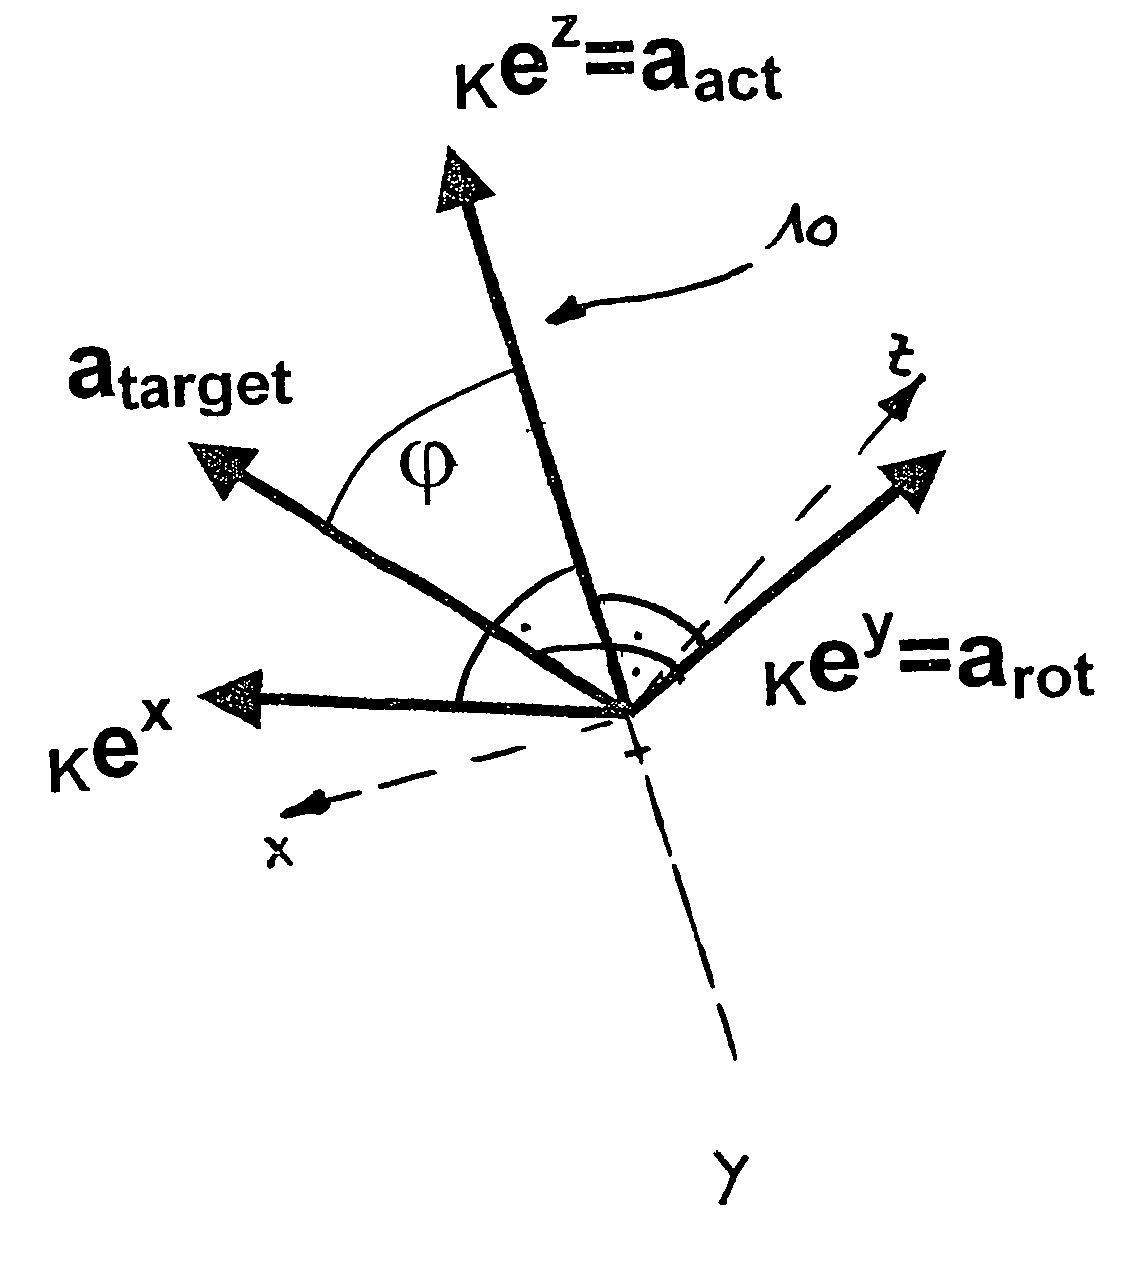 Controlling the trajectory of an effector